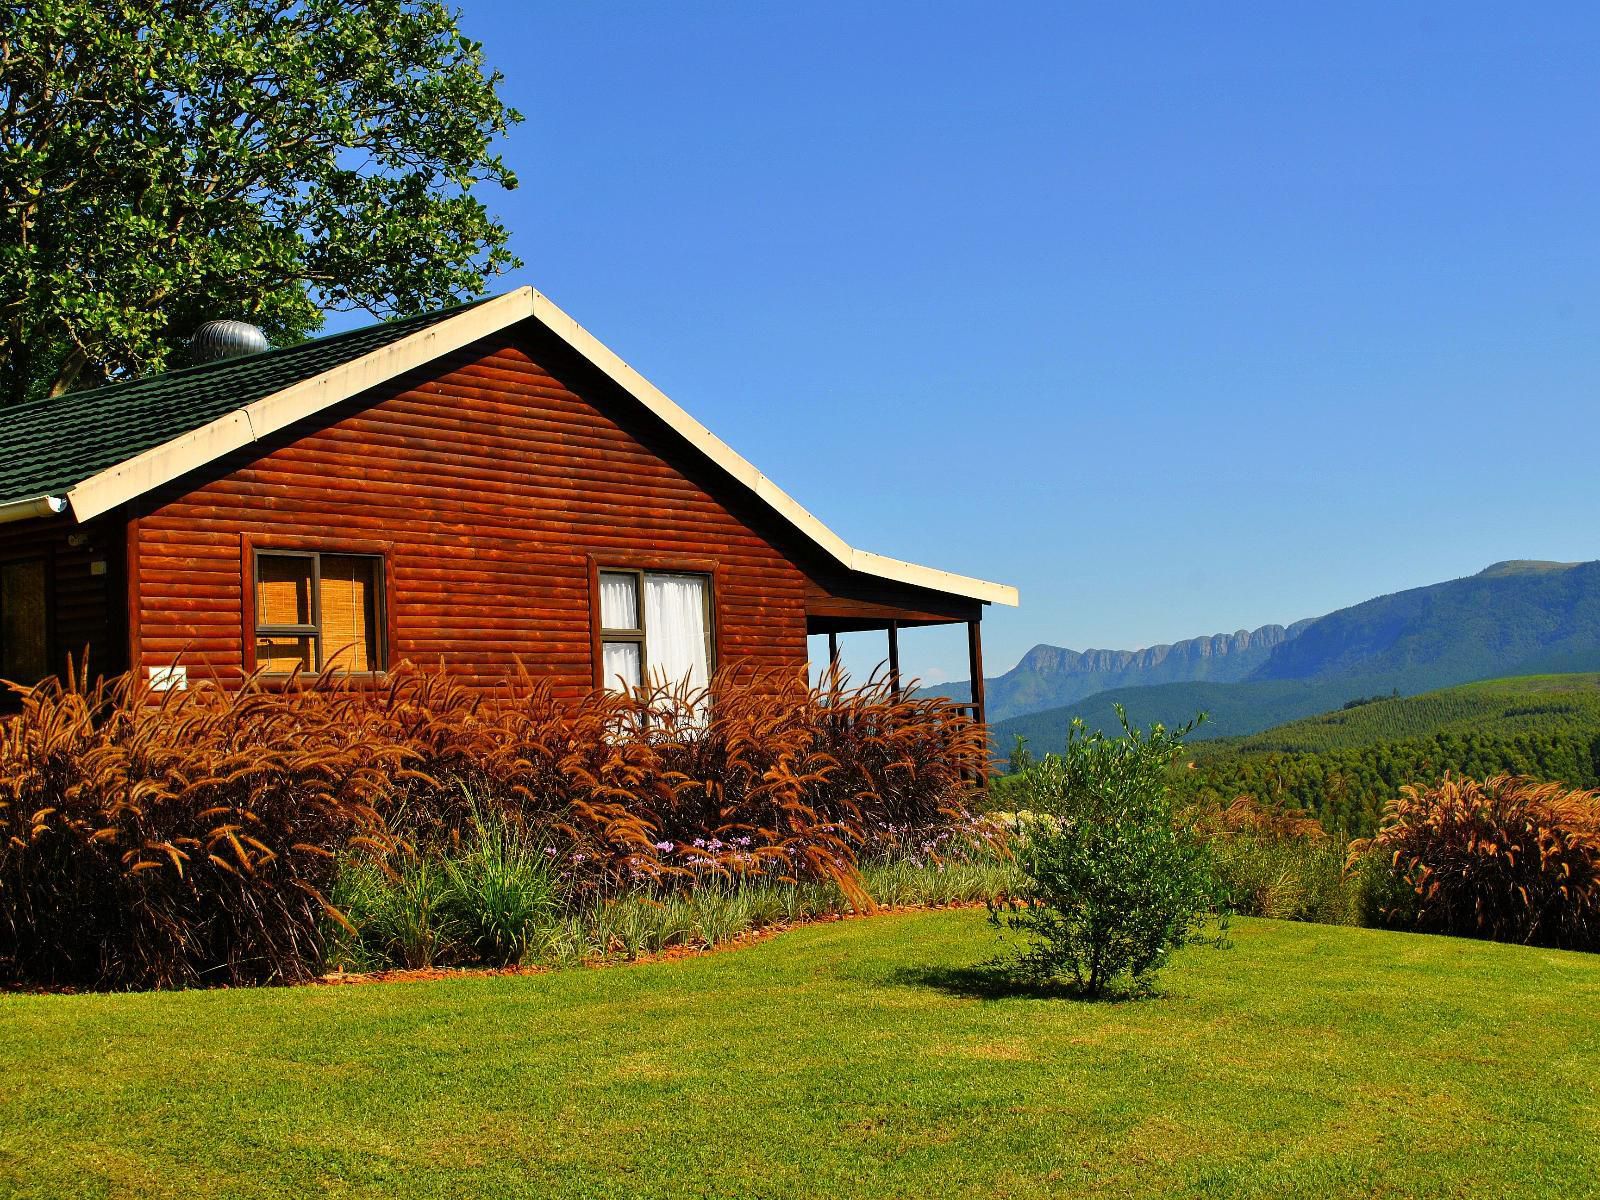 Forest View Cabins Tzaneen Limpopo Province South Africa Complementary Colors, Cabin, Building, Architecture, Mountain, Nature